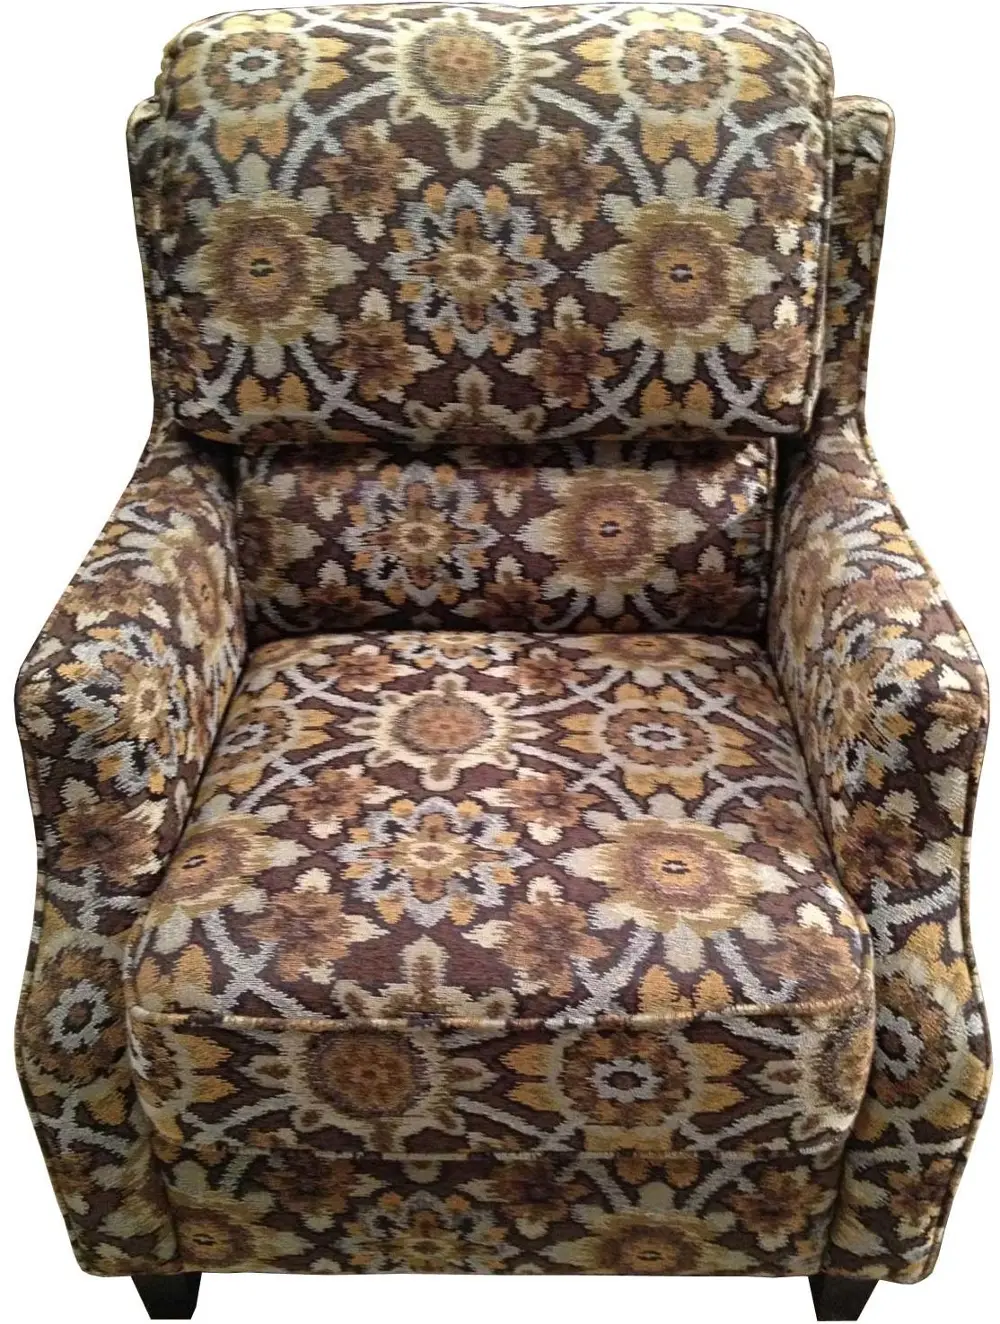 29 Inch Multi-Colored Upholstered Accent Chair-1